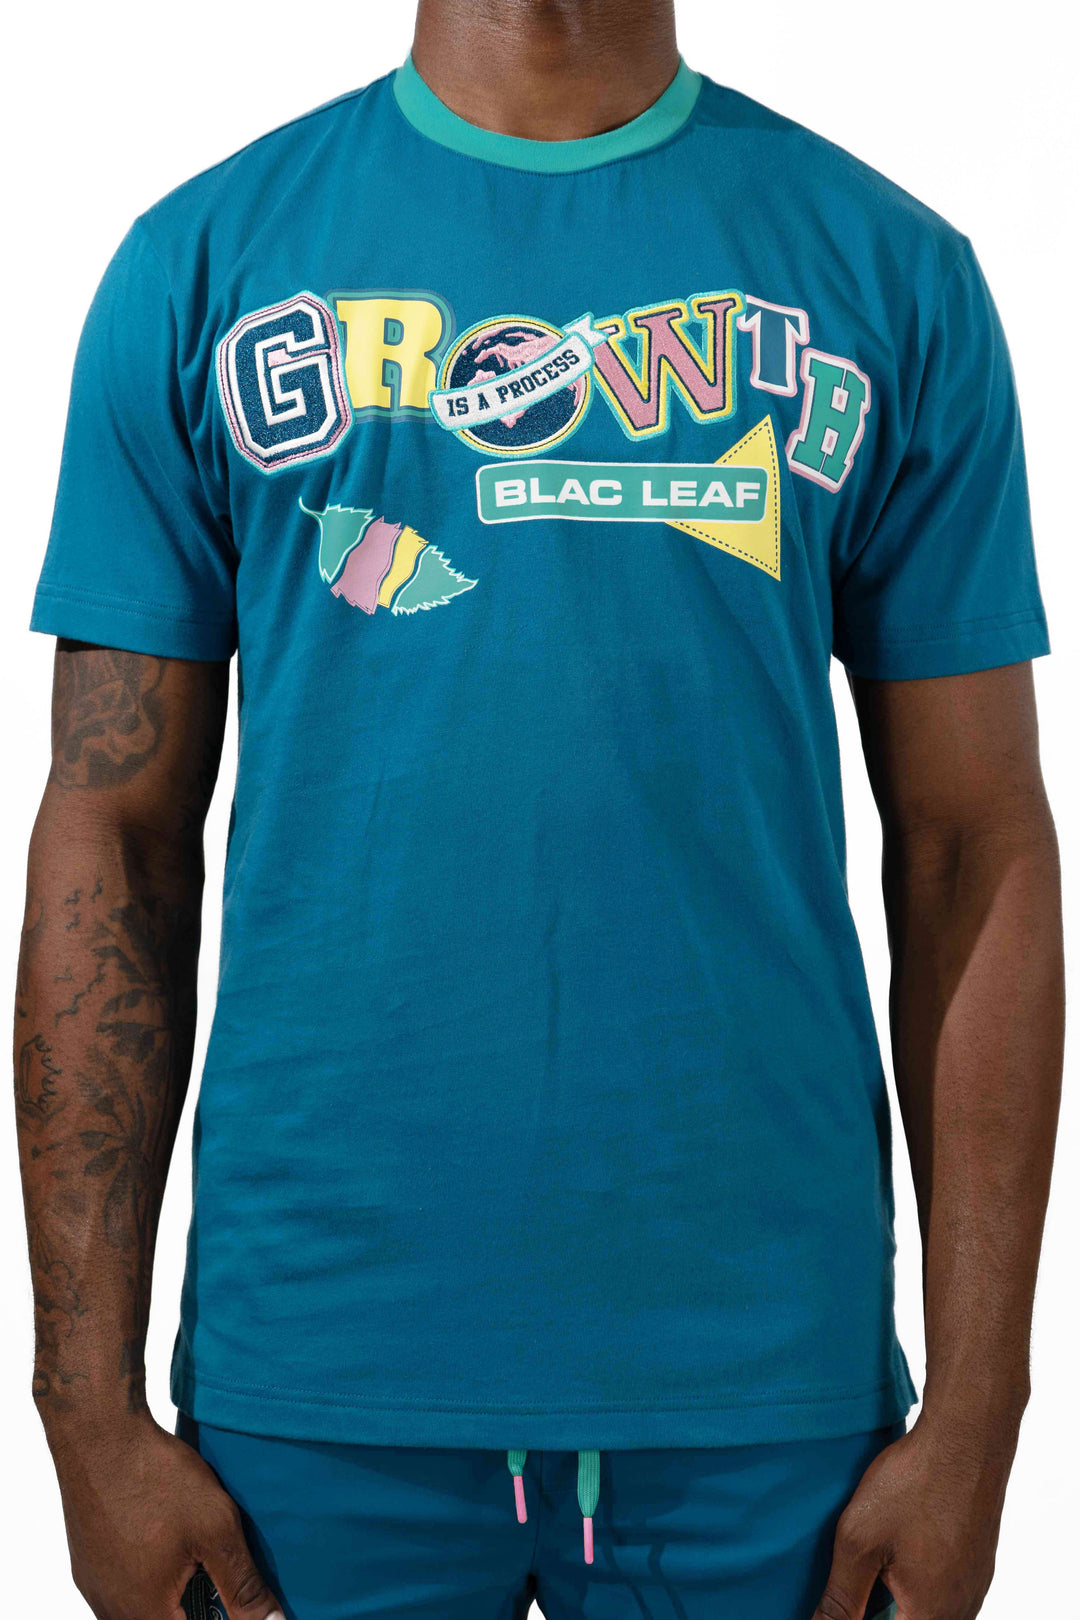 Growth Letter Collage Shirt